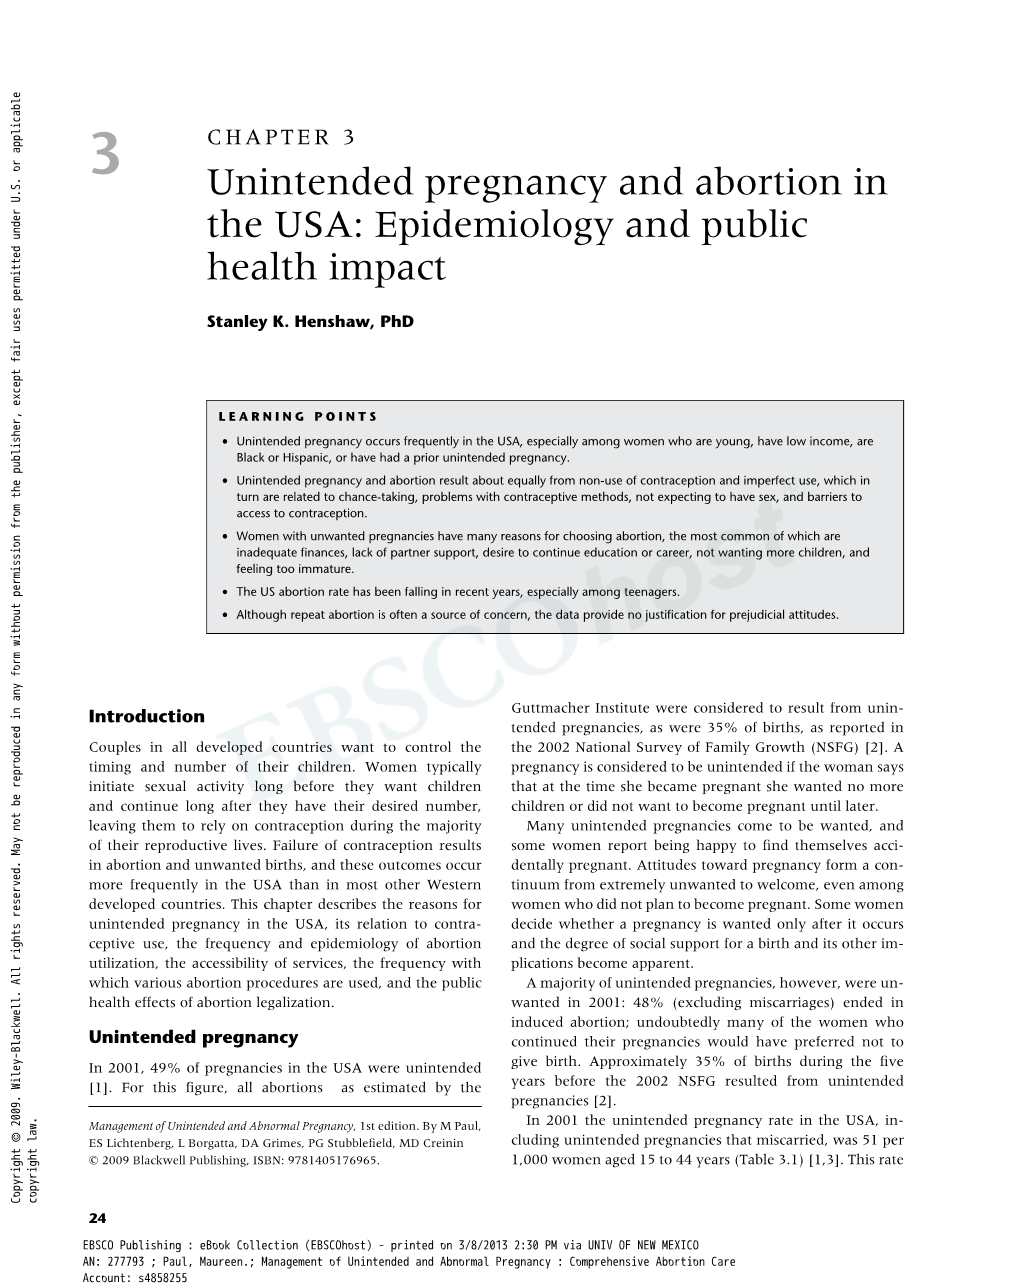 Unintended Pregnancy and Abortion in the USA: Epidemiology and Public Health Impact